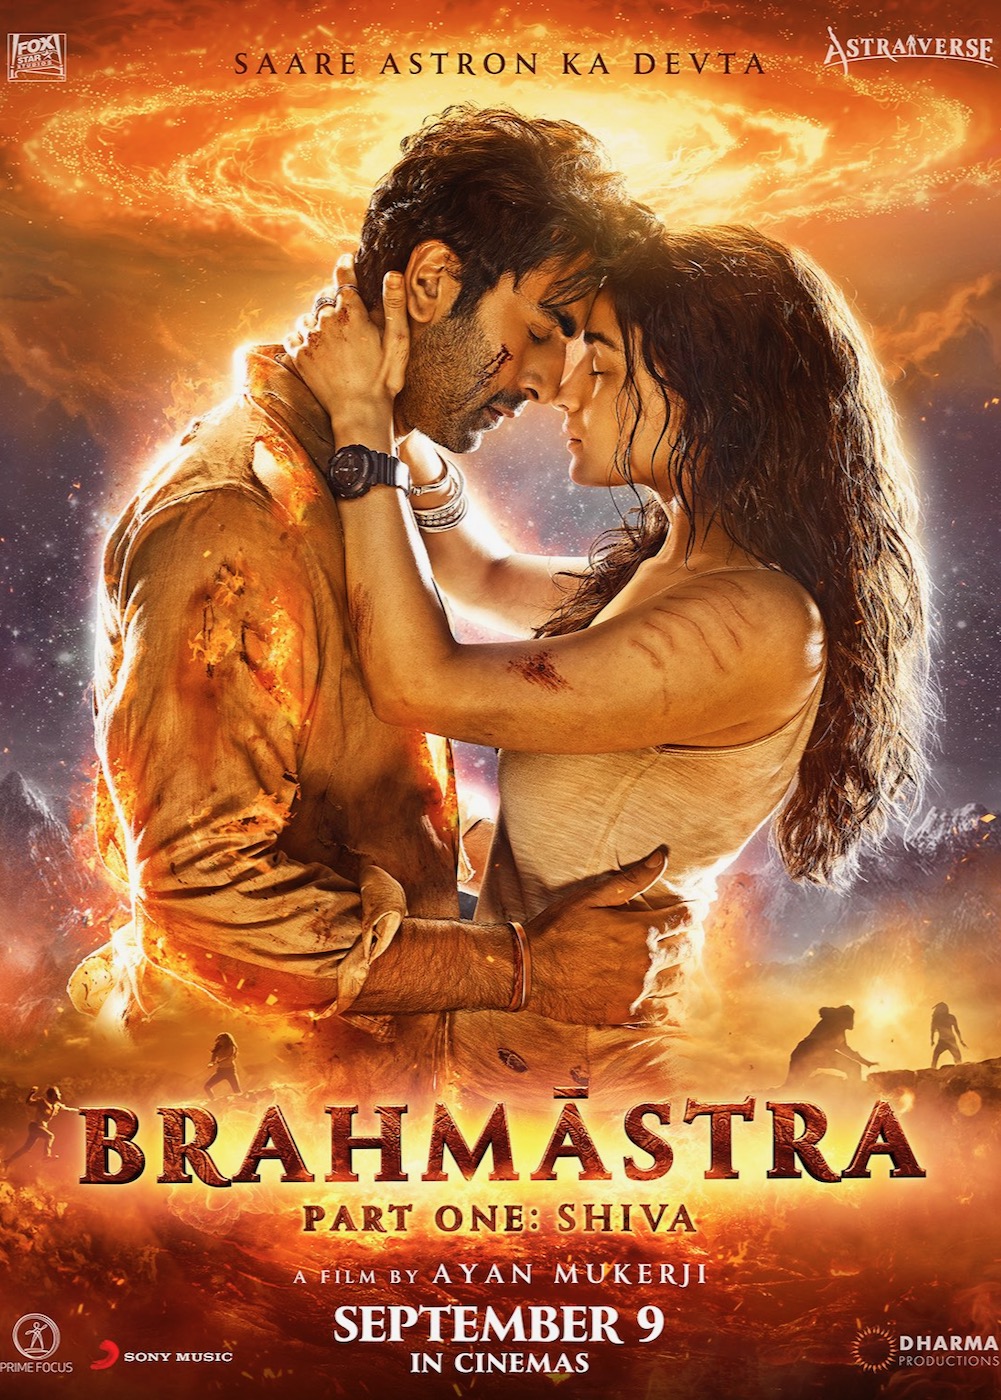 Brahmastra Movie Release Date, Cast, Trailer, Songs, Review